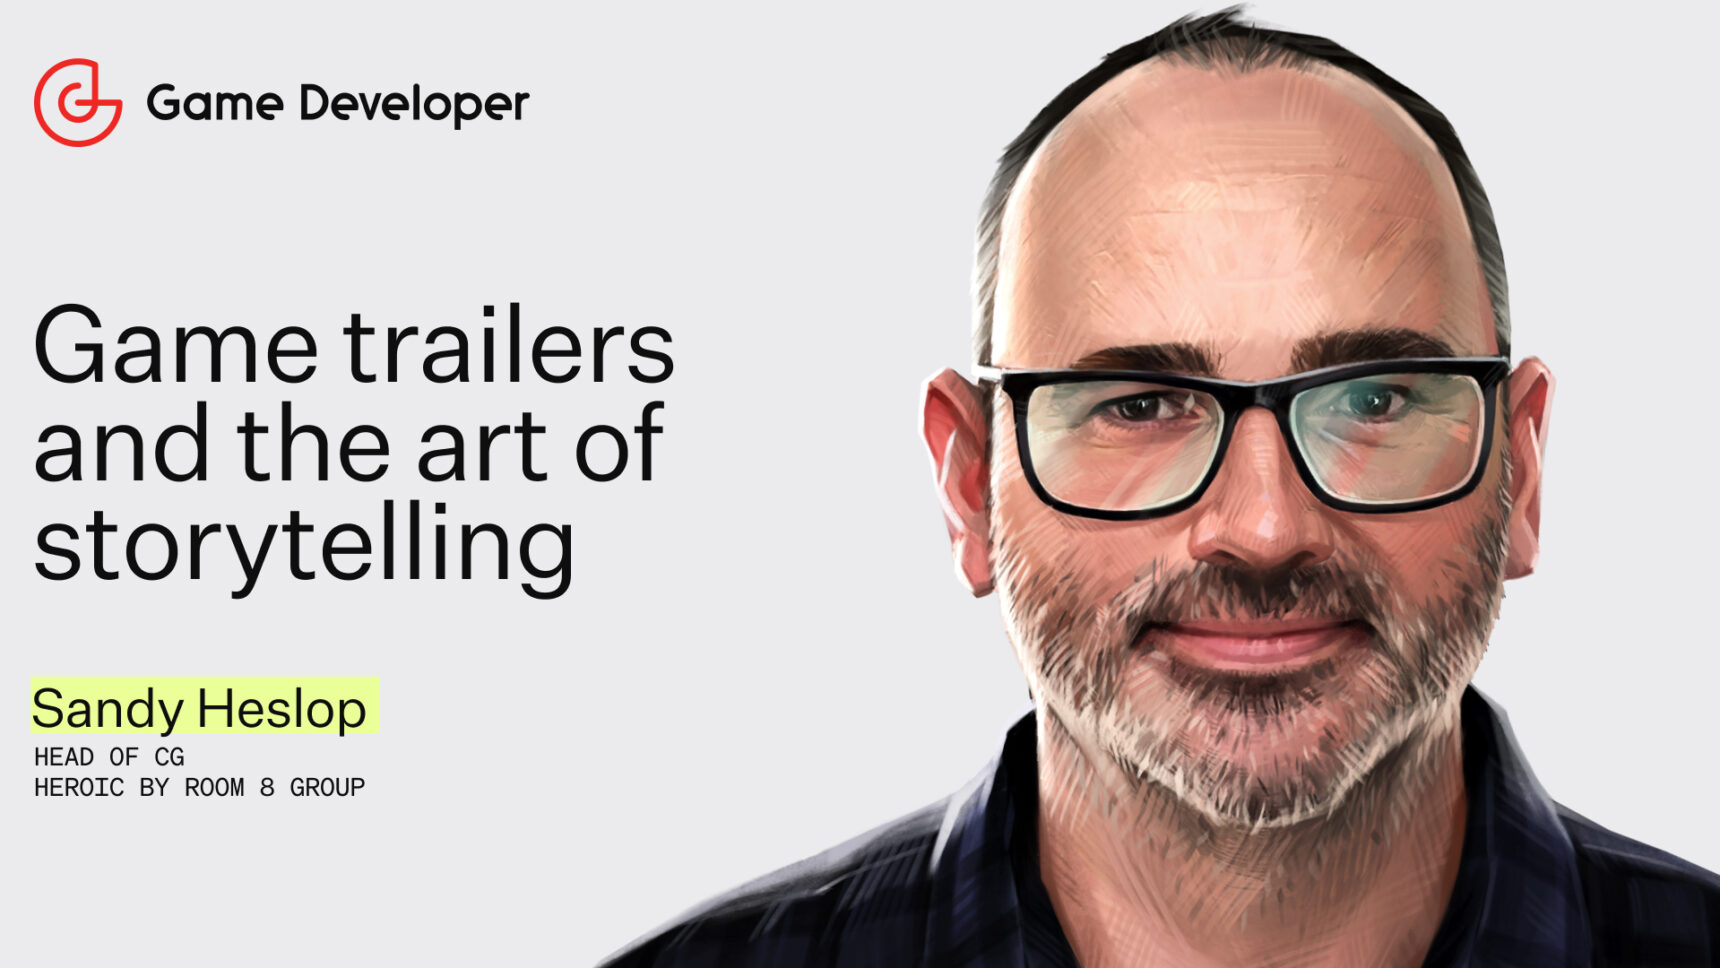 Sandy Heslop for Game Developer: Game Trailers and the Art of Storytelling